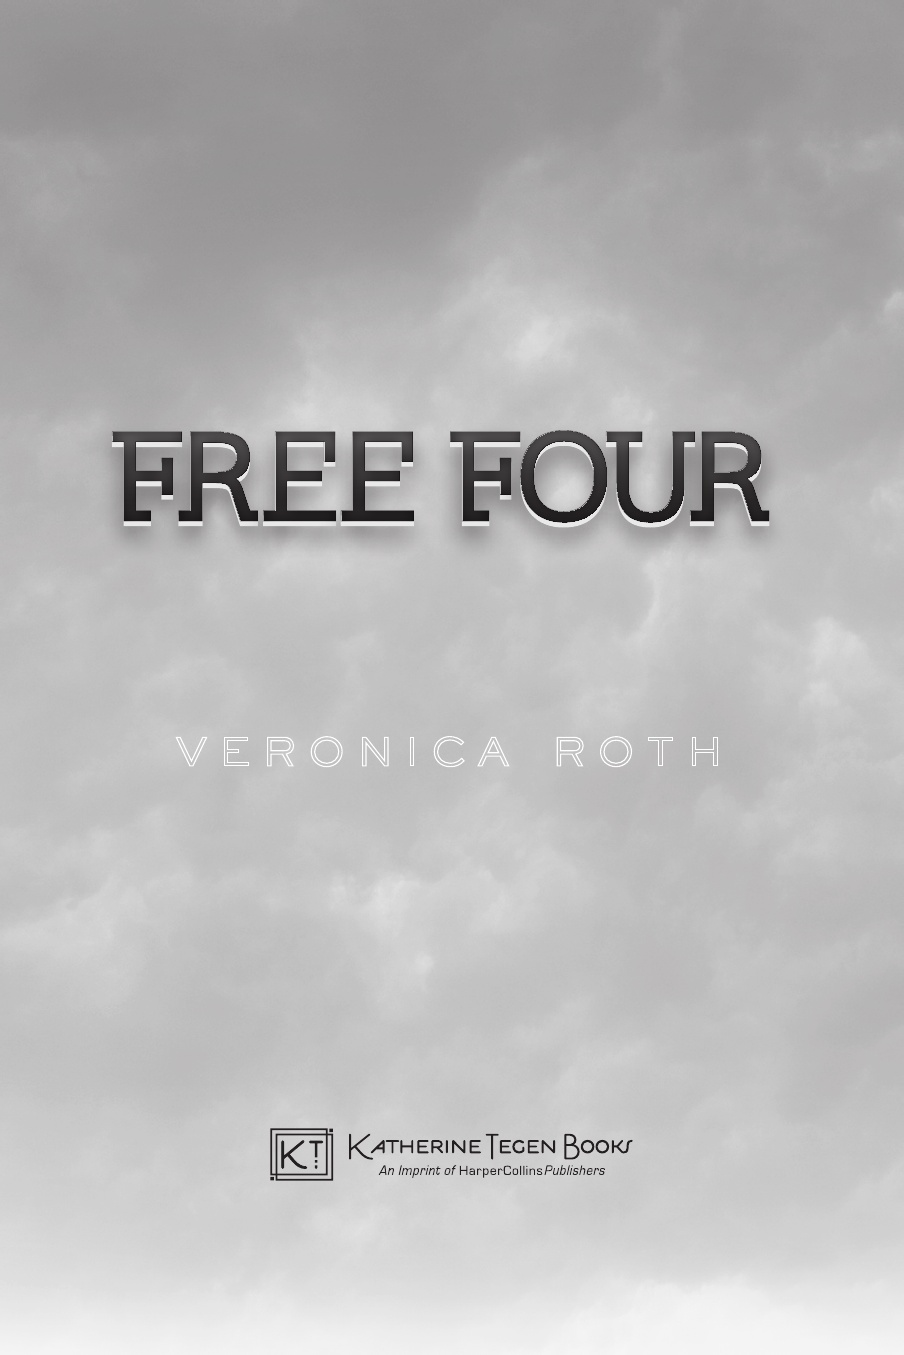 Divergent Trilogy 01.1 FREE FOUR: Tobias tells the story by Veronica Roth